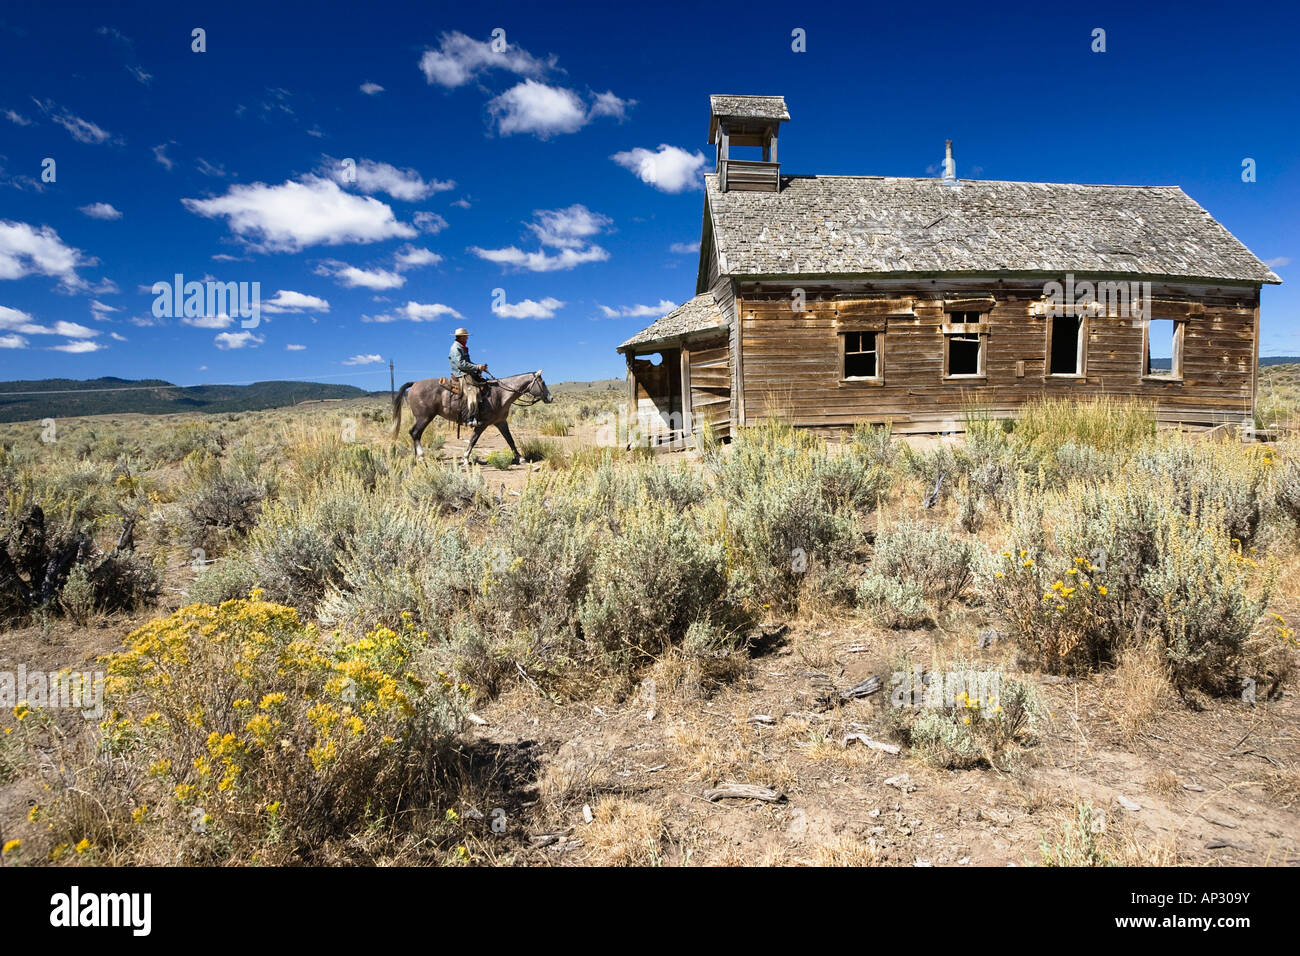 Cowboy with horse at old schoolhouse, wildwest, Oregon, USA Stock Photo